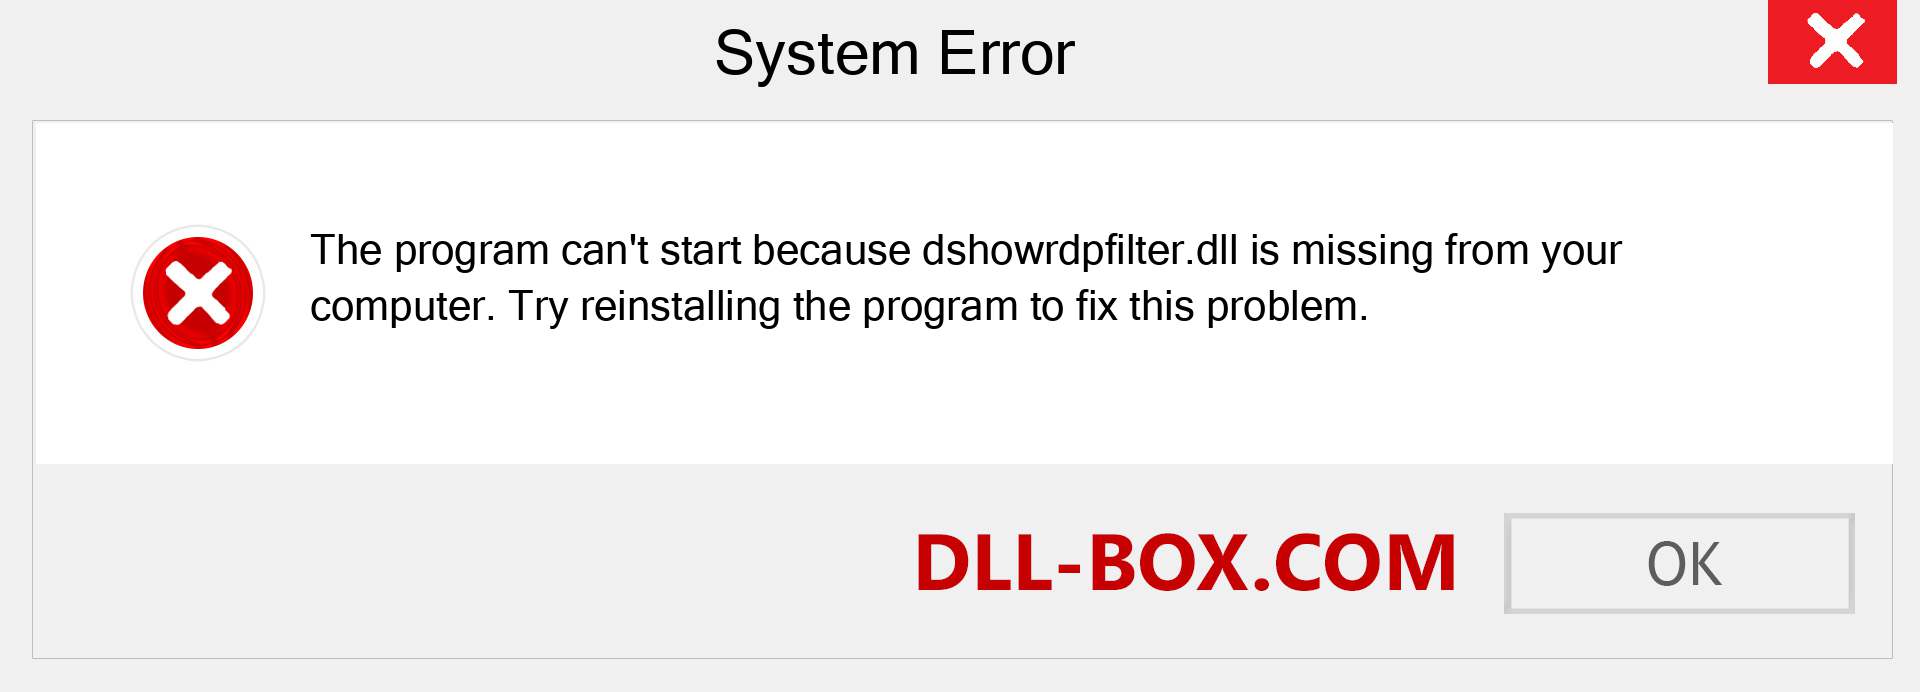  dshowrdpfilter.dll file is missing?. Download for Windows 7, 8, 10 - Fix  dshowrdpfilter dll Missing Error on Windows, photos, images